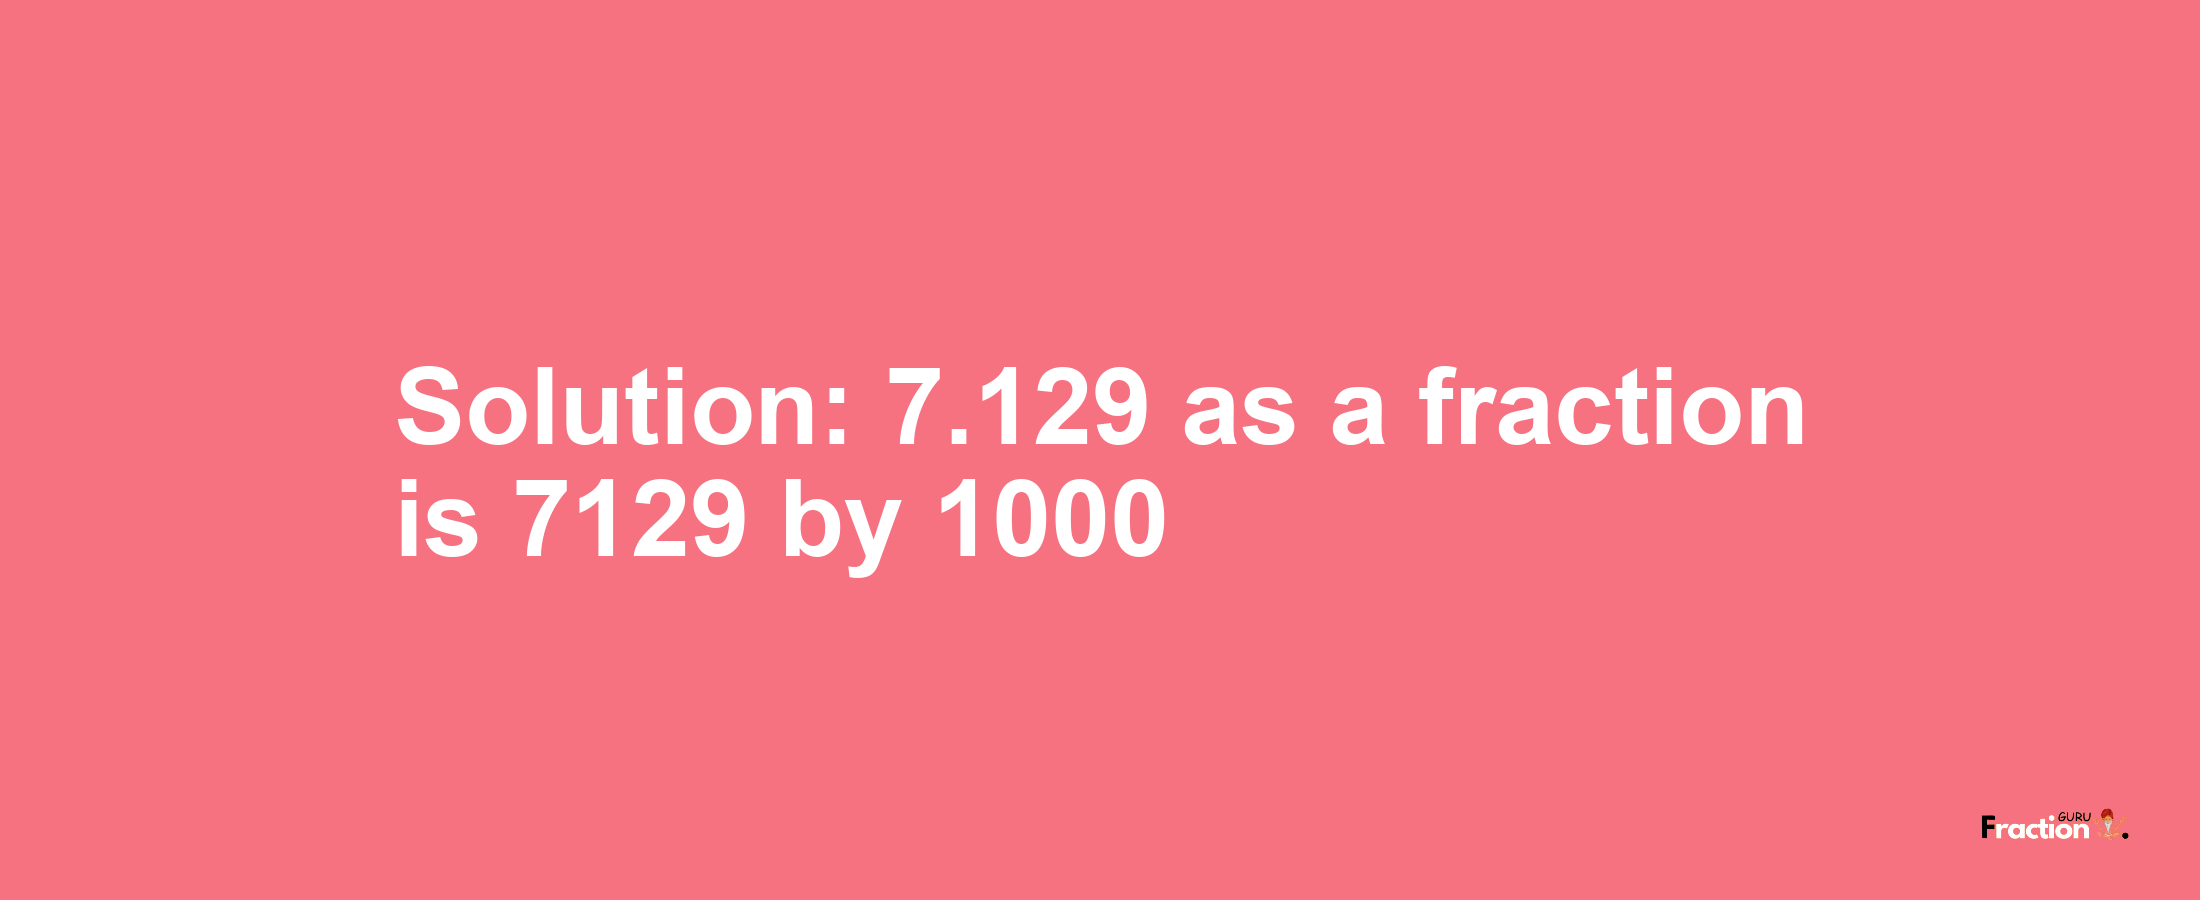 Solution:7.129 as a fraction is 7129/1000